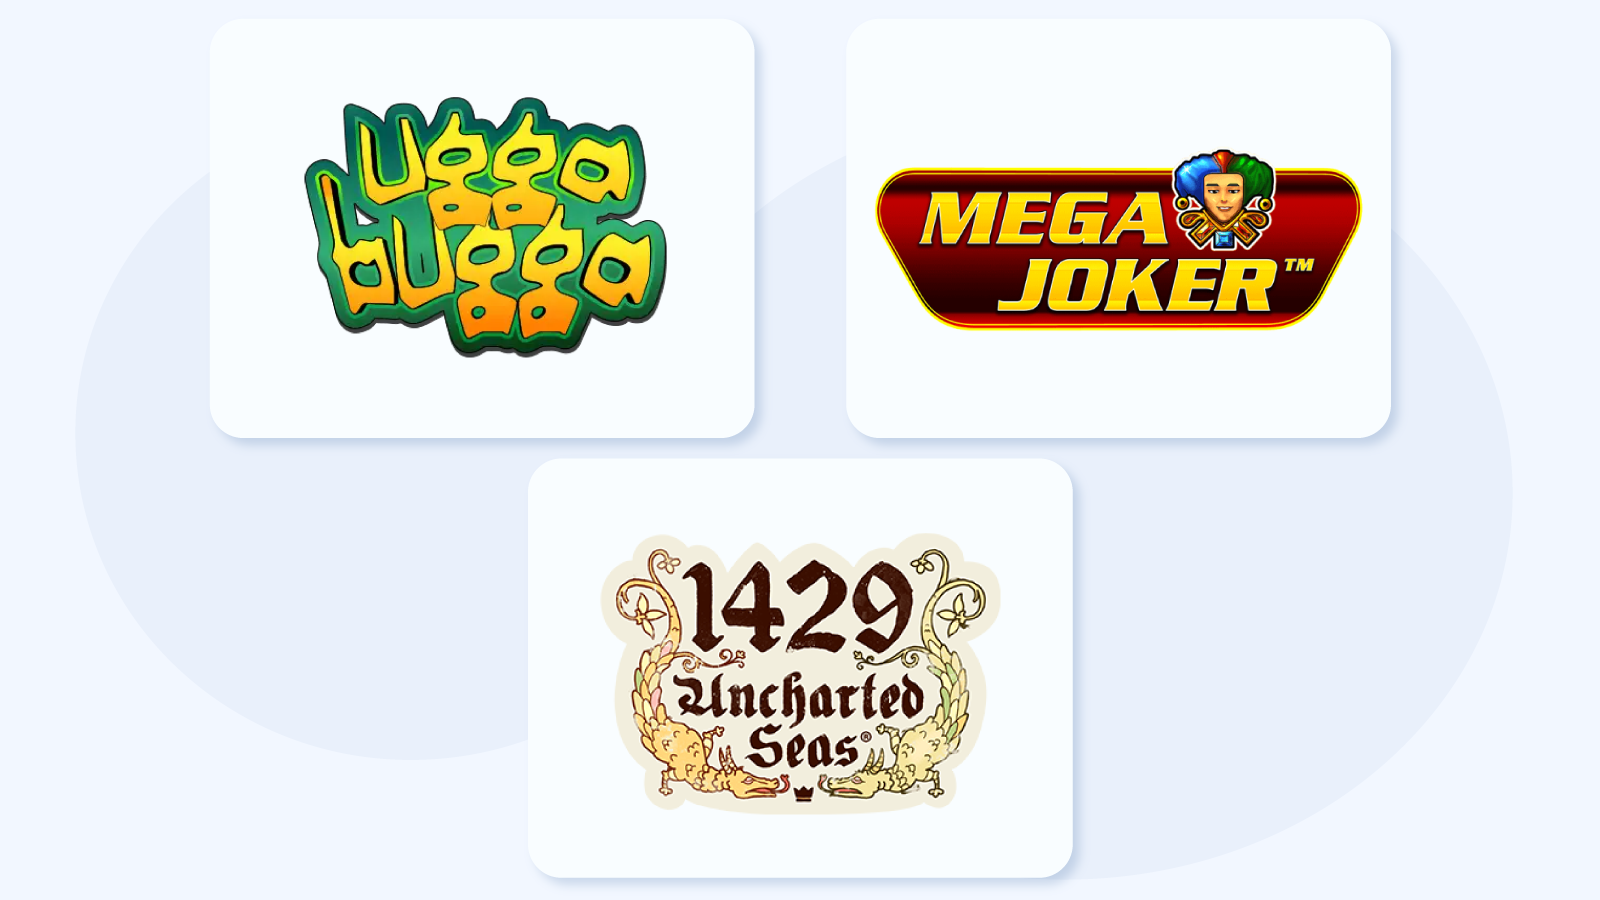 Find-the-best-slot-games-for-your-bonus-play